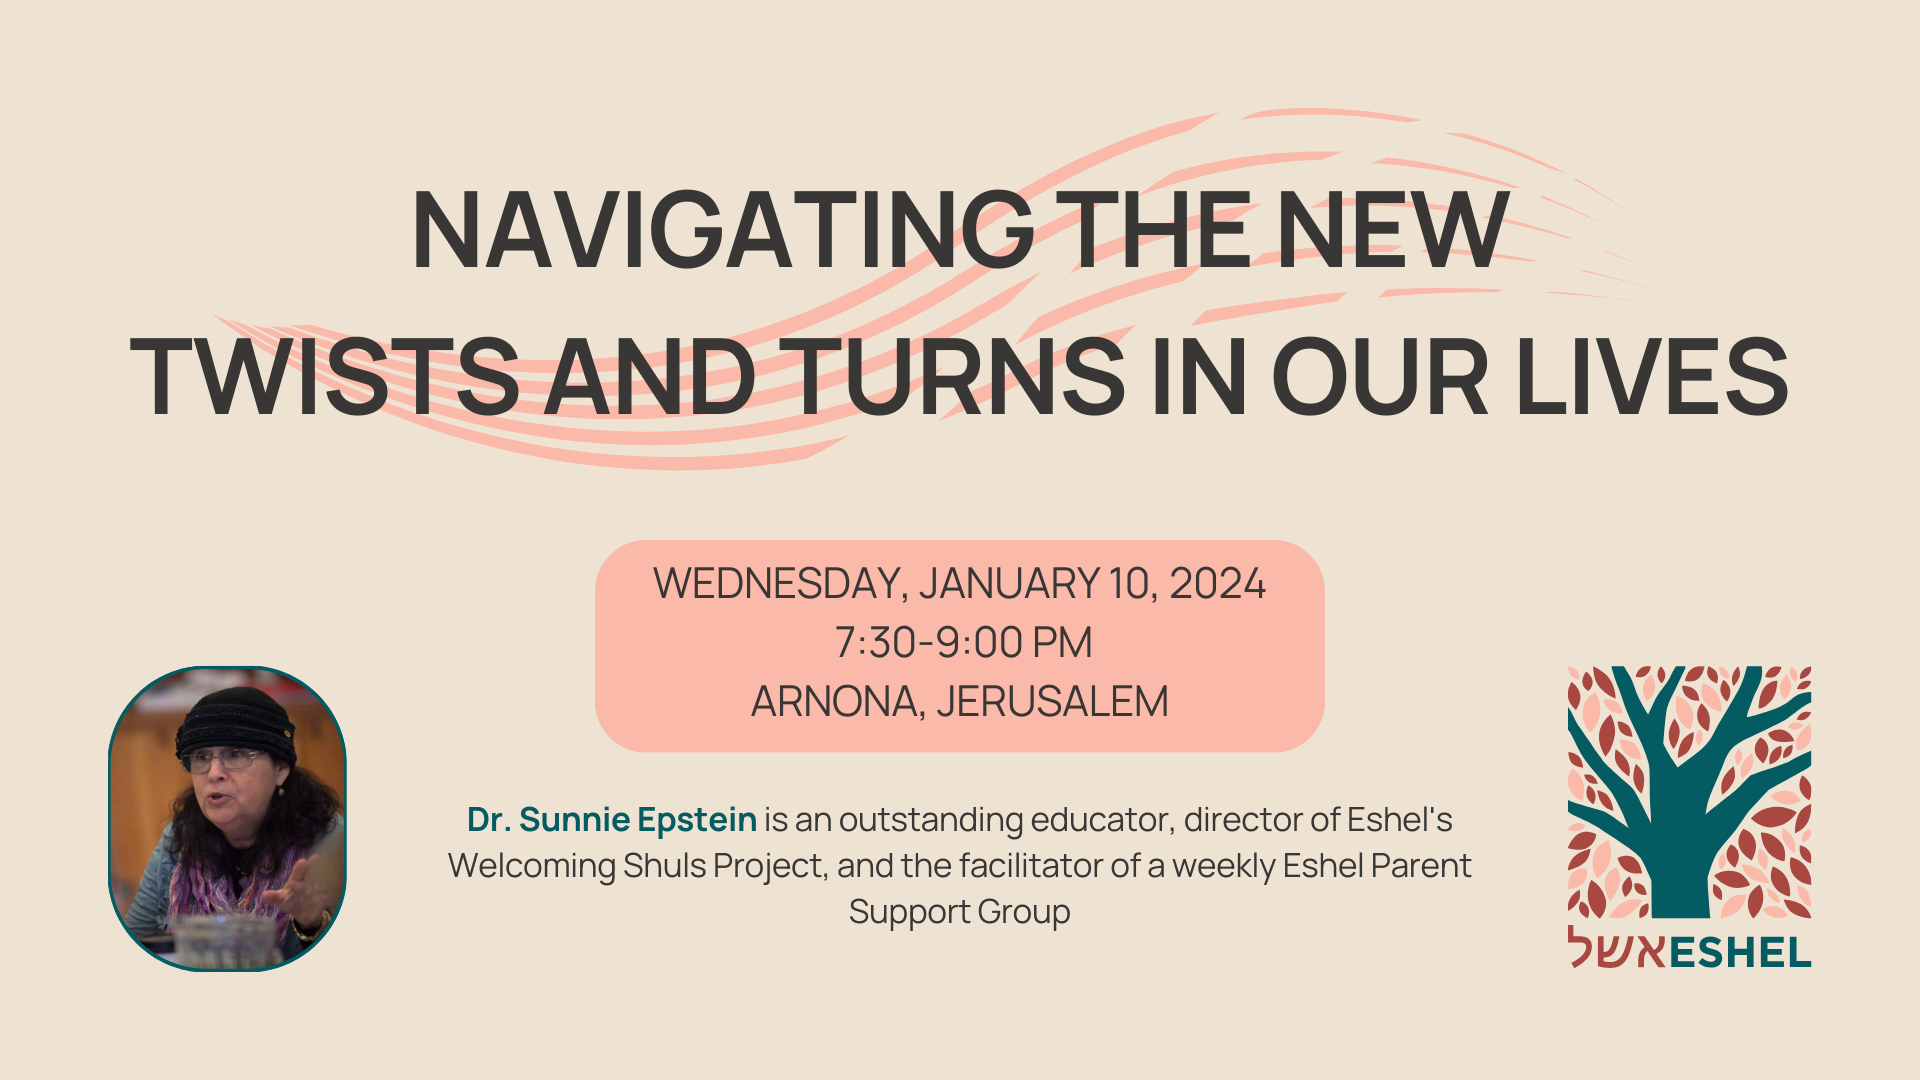 Navigating the Twists and Turns in Our Lives | Wenesday, January 10, 2024, 7:30 - 9:00 pm, Arnona Jerusalem